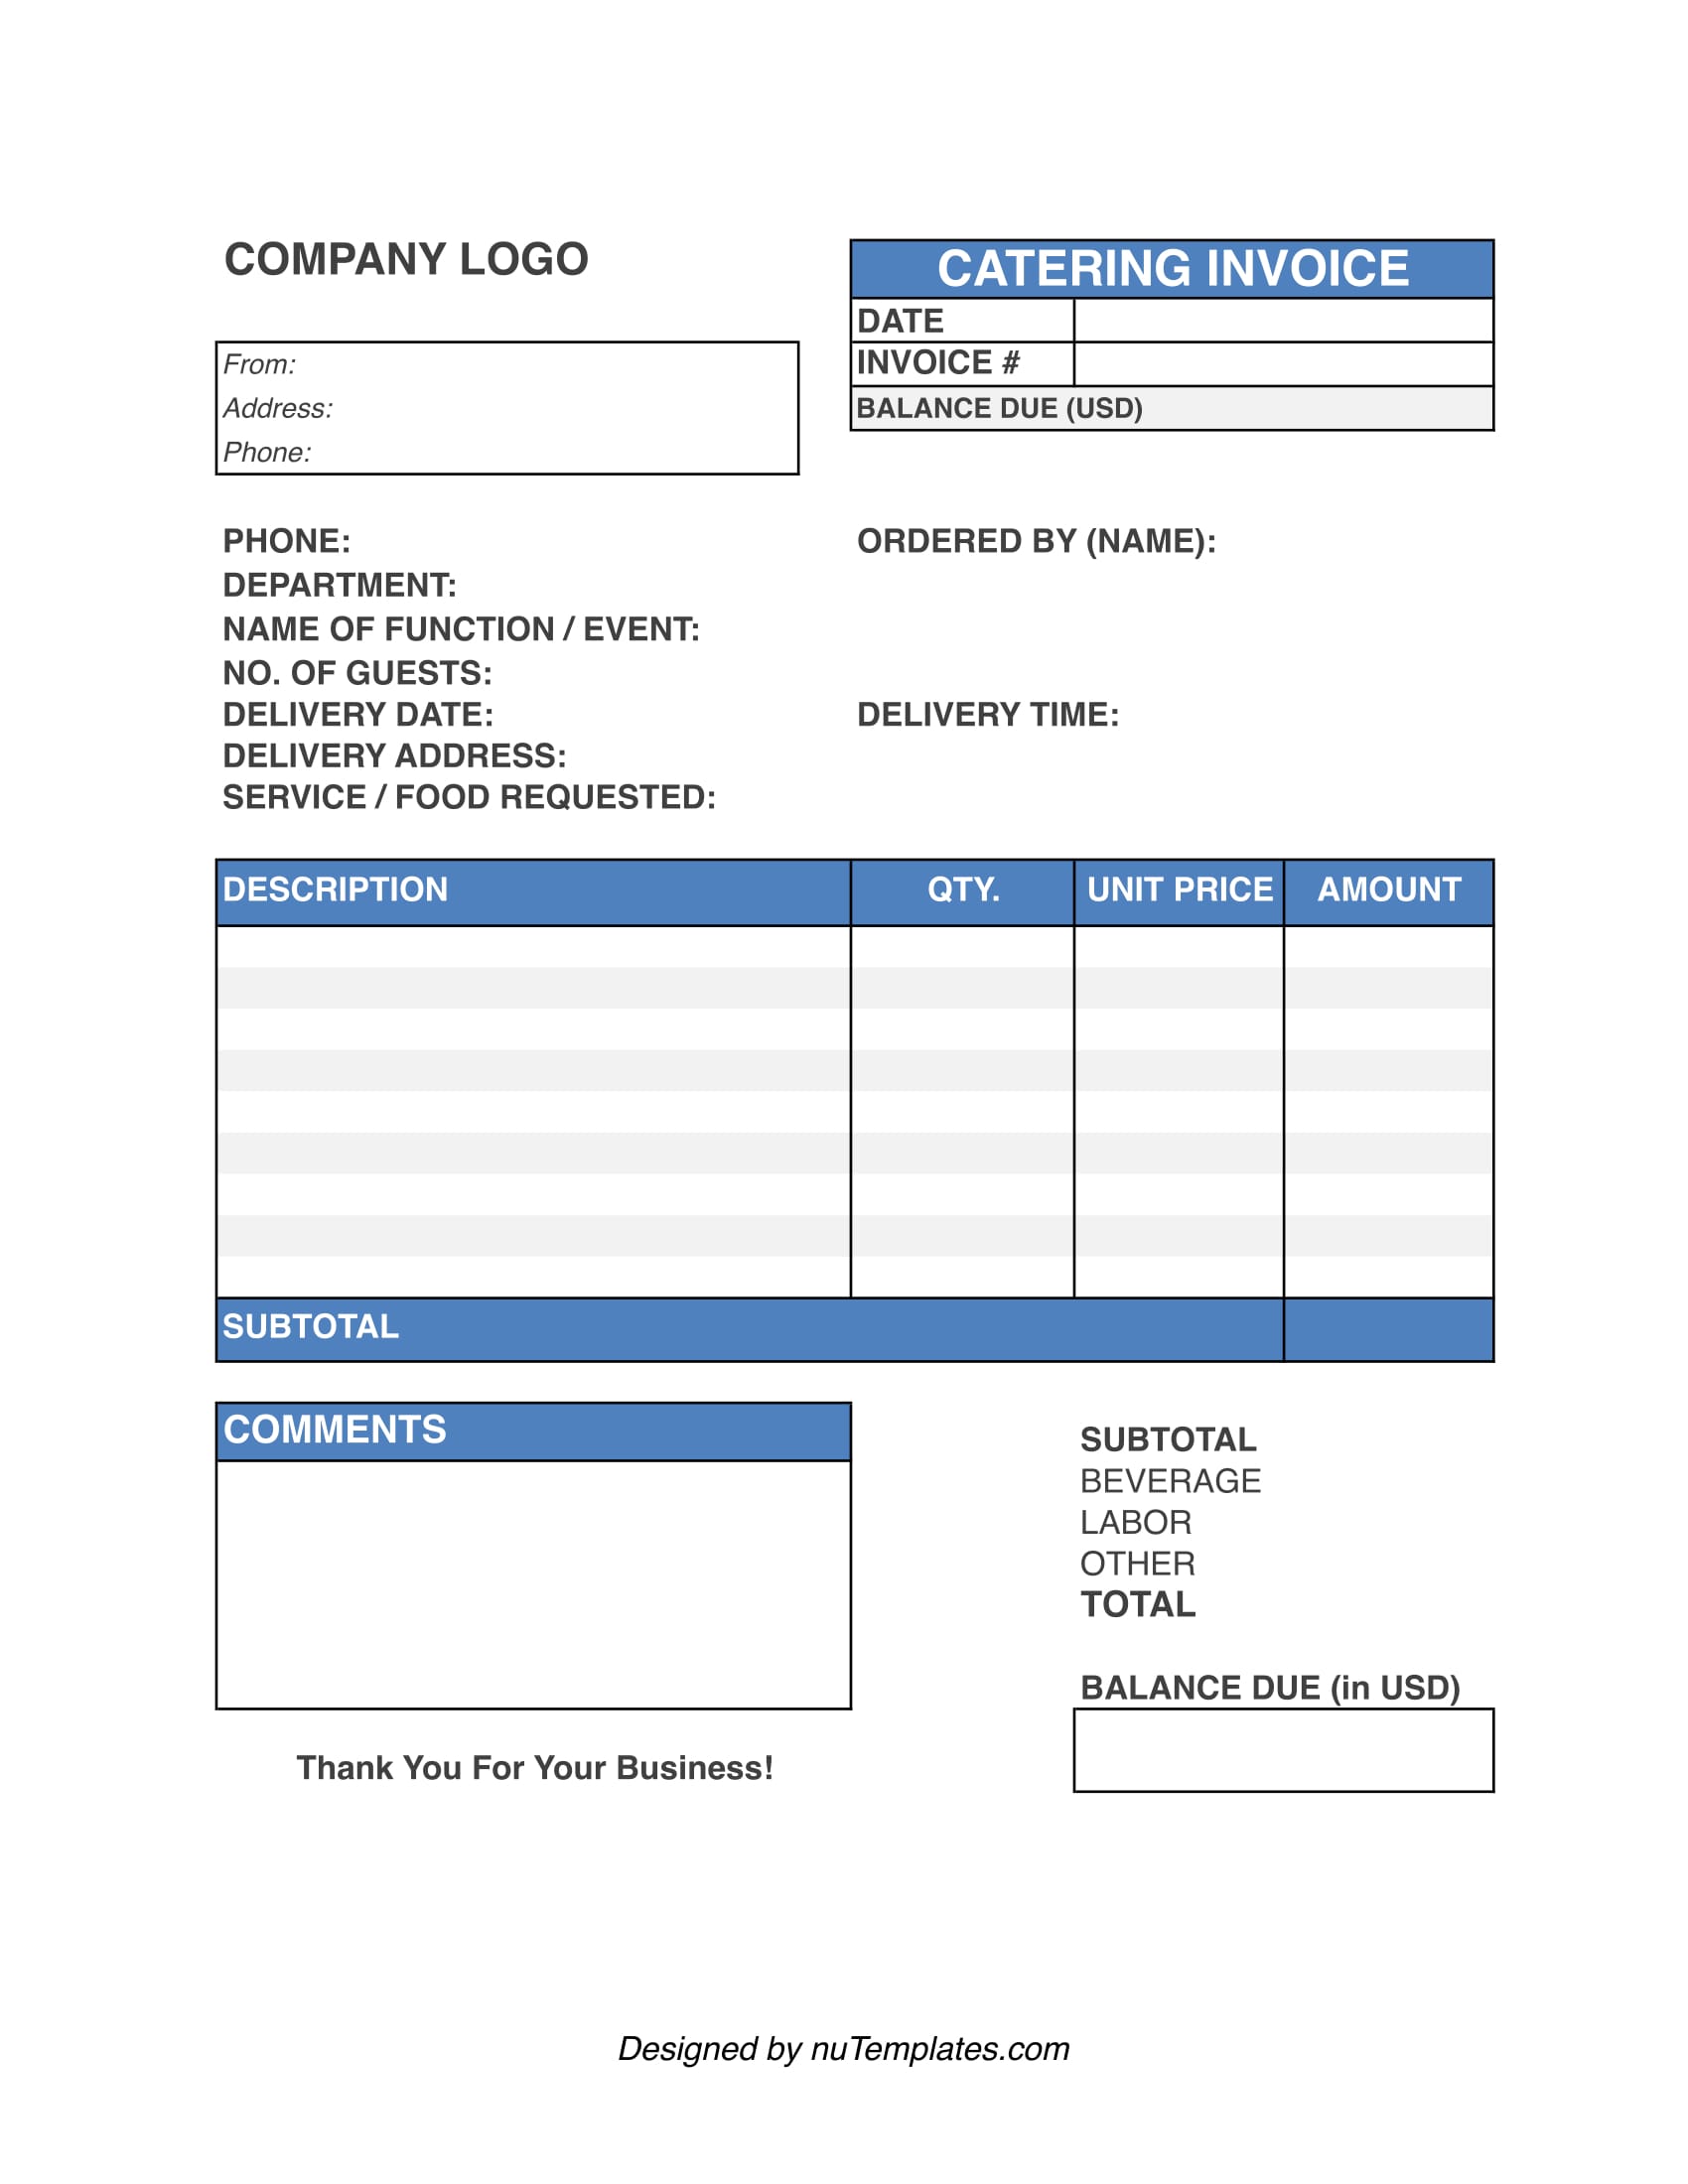 catering-invoice-template-catering-invoices-nutemplates